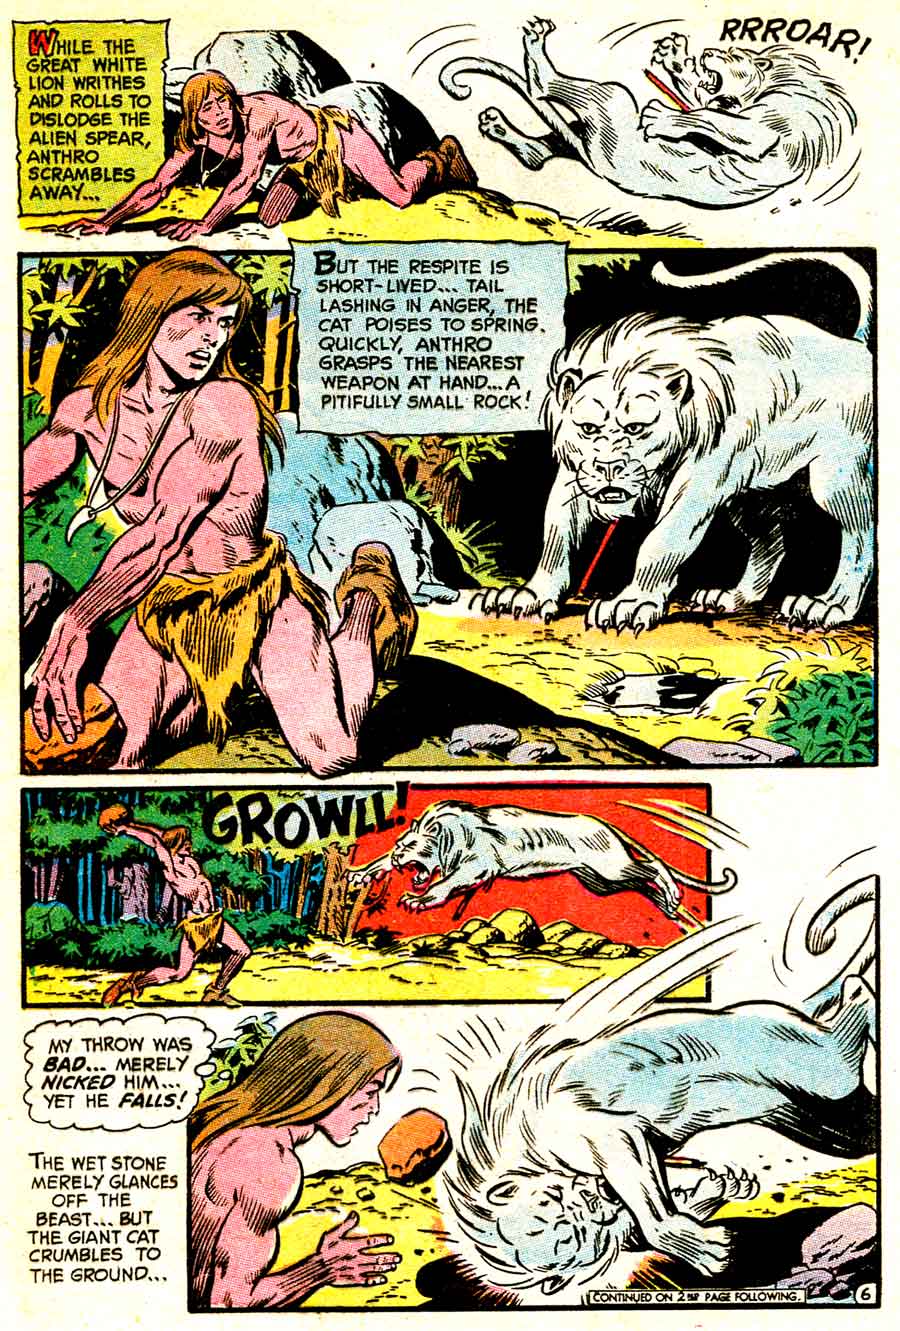 Anthro v1 #6 dc silver age 1960s comic book page art by Wally Wood